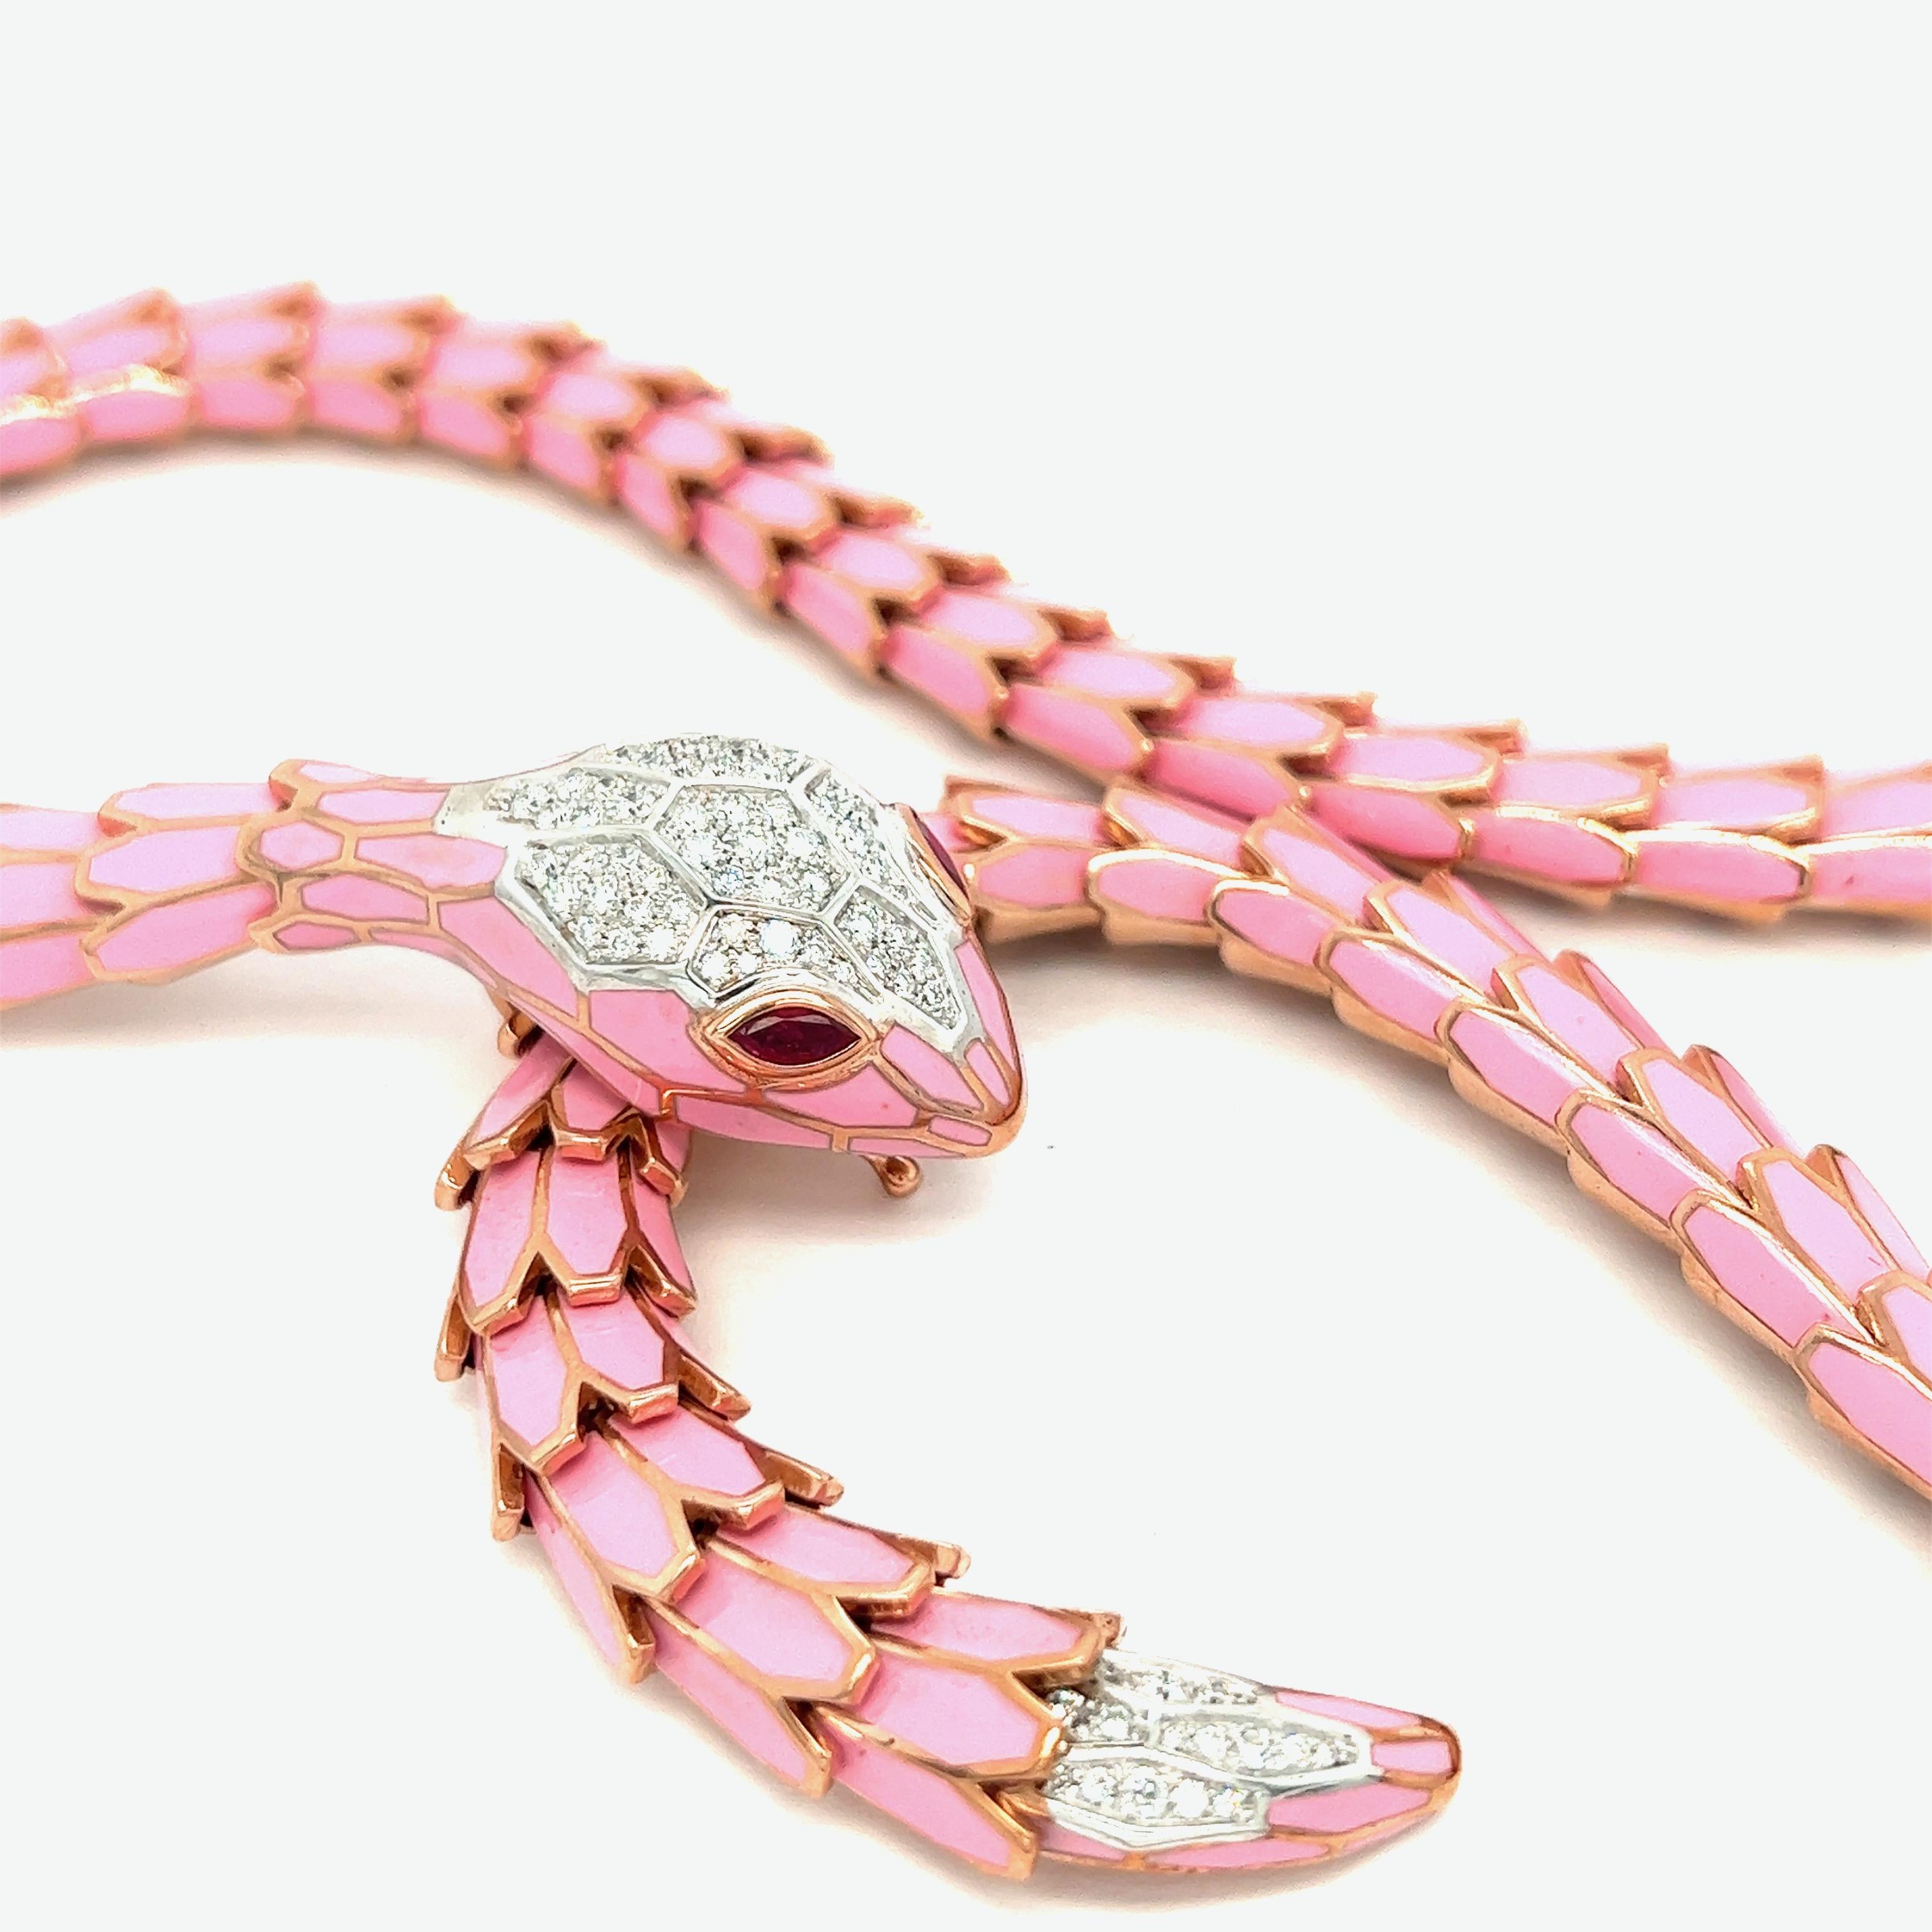 Medium pink enamel snake necklace, short model

Round-cut diamonds of 1.20 carats, Marquise-shaped rubies of 0.56 carat, 18 karat white gold, silver with a tone of rose gold; marked 750, 925, D. 1.20, R. 0.56, N012RM10-0096

Size: length 20.75